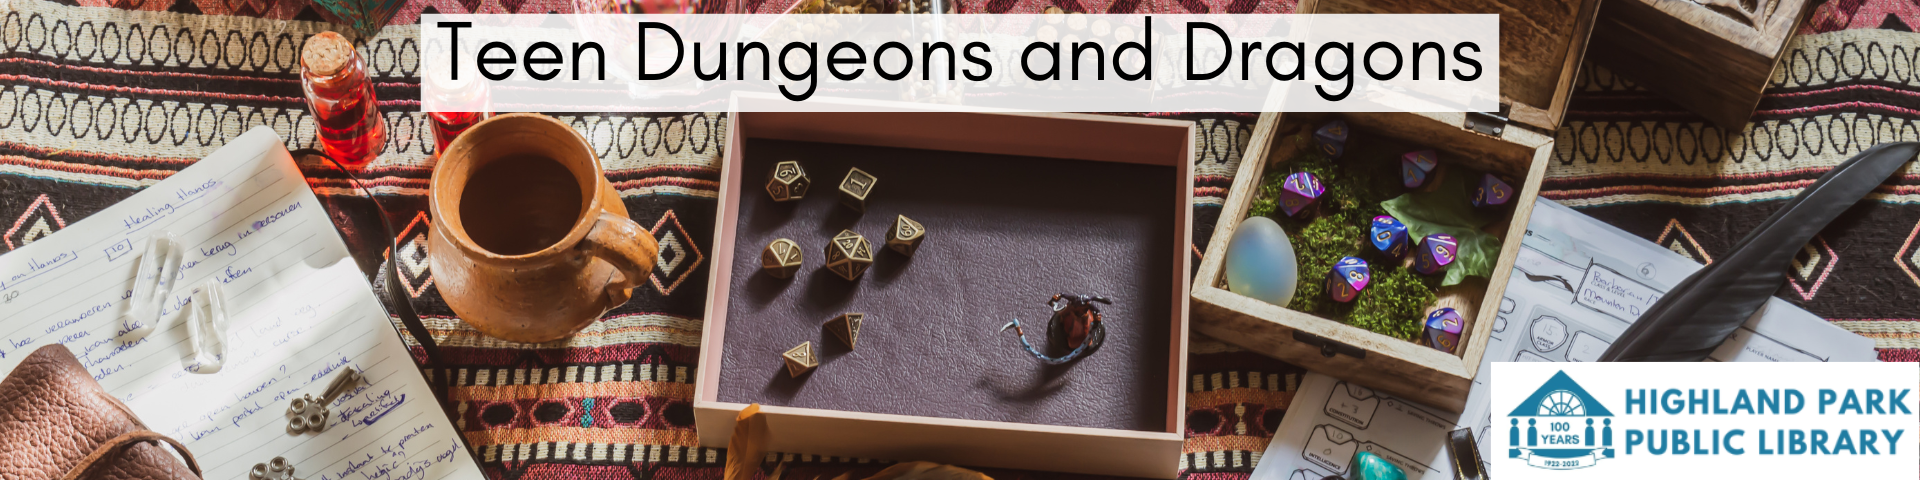 photo of a wooden table covered by dice, character sheets, and other rpg items. Text: Teen Dungeons and Dragons, Highland Park Public Library